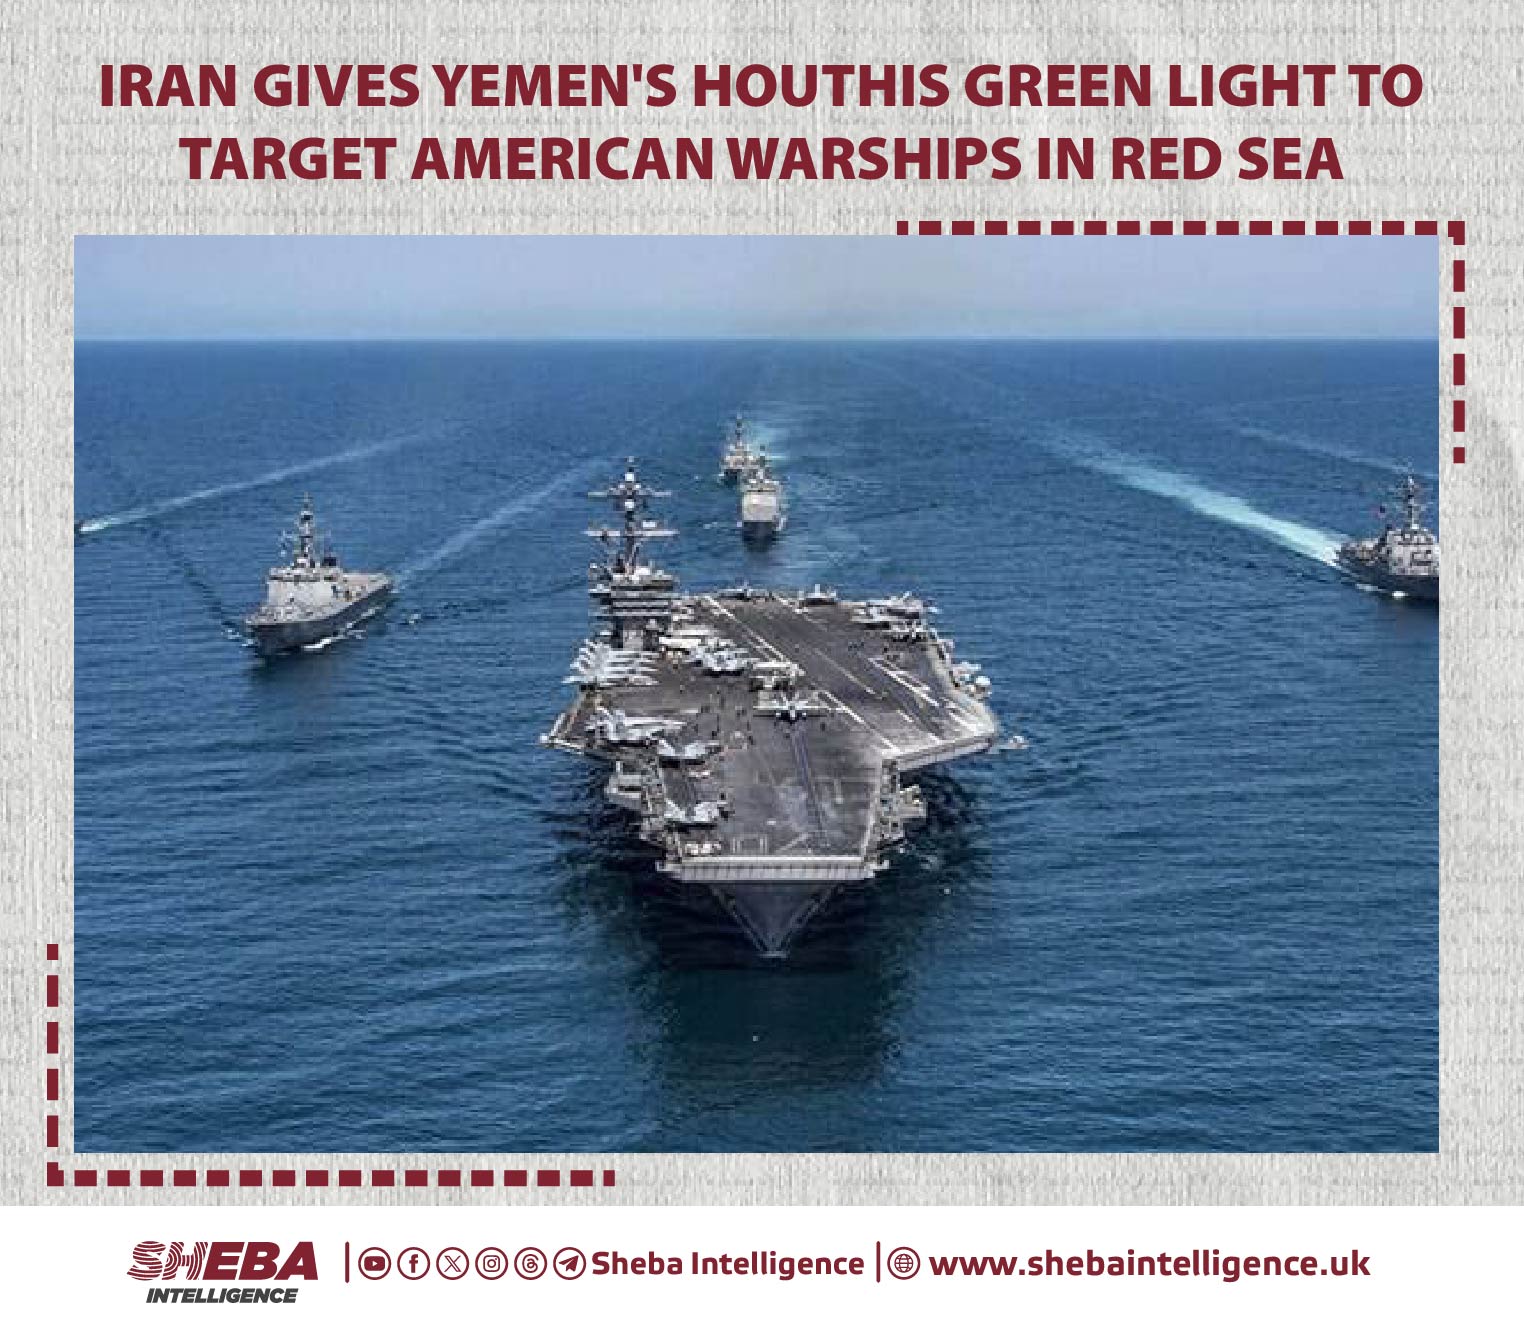 Iran Gives Yemen's Houthis Green Light to Target American Warships in Red Sea